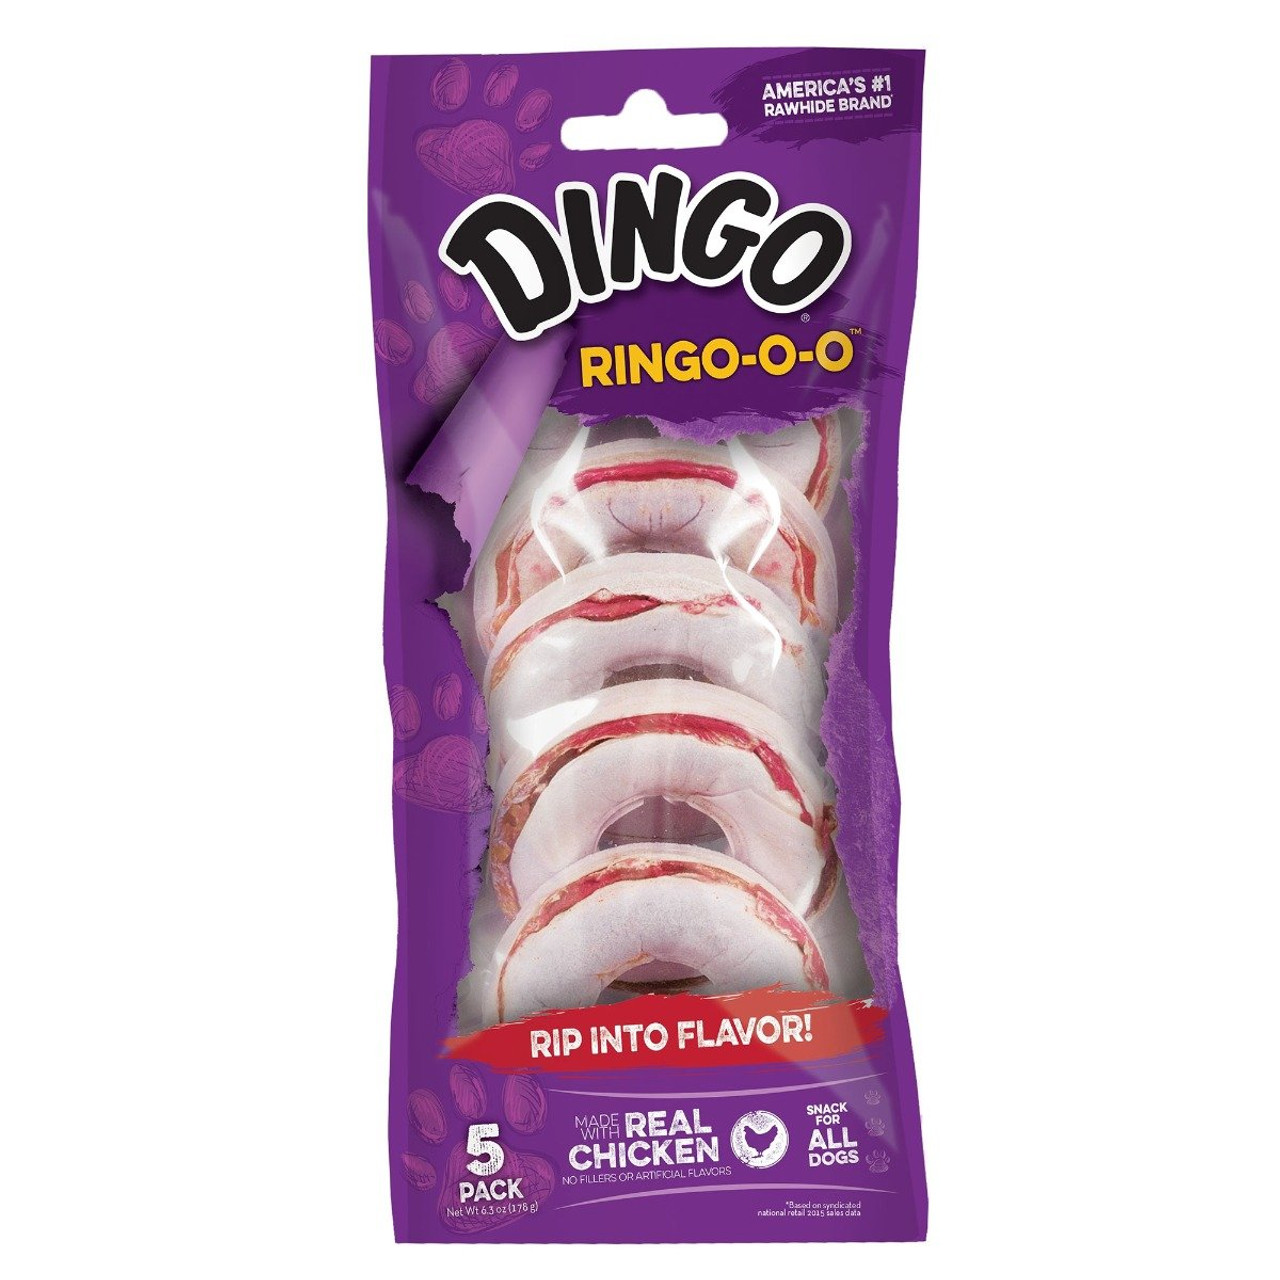 THE REAL DINGO